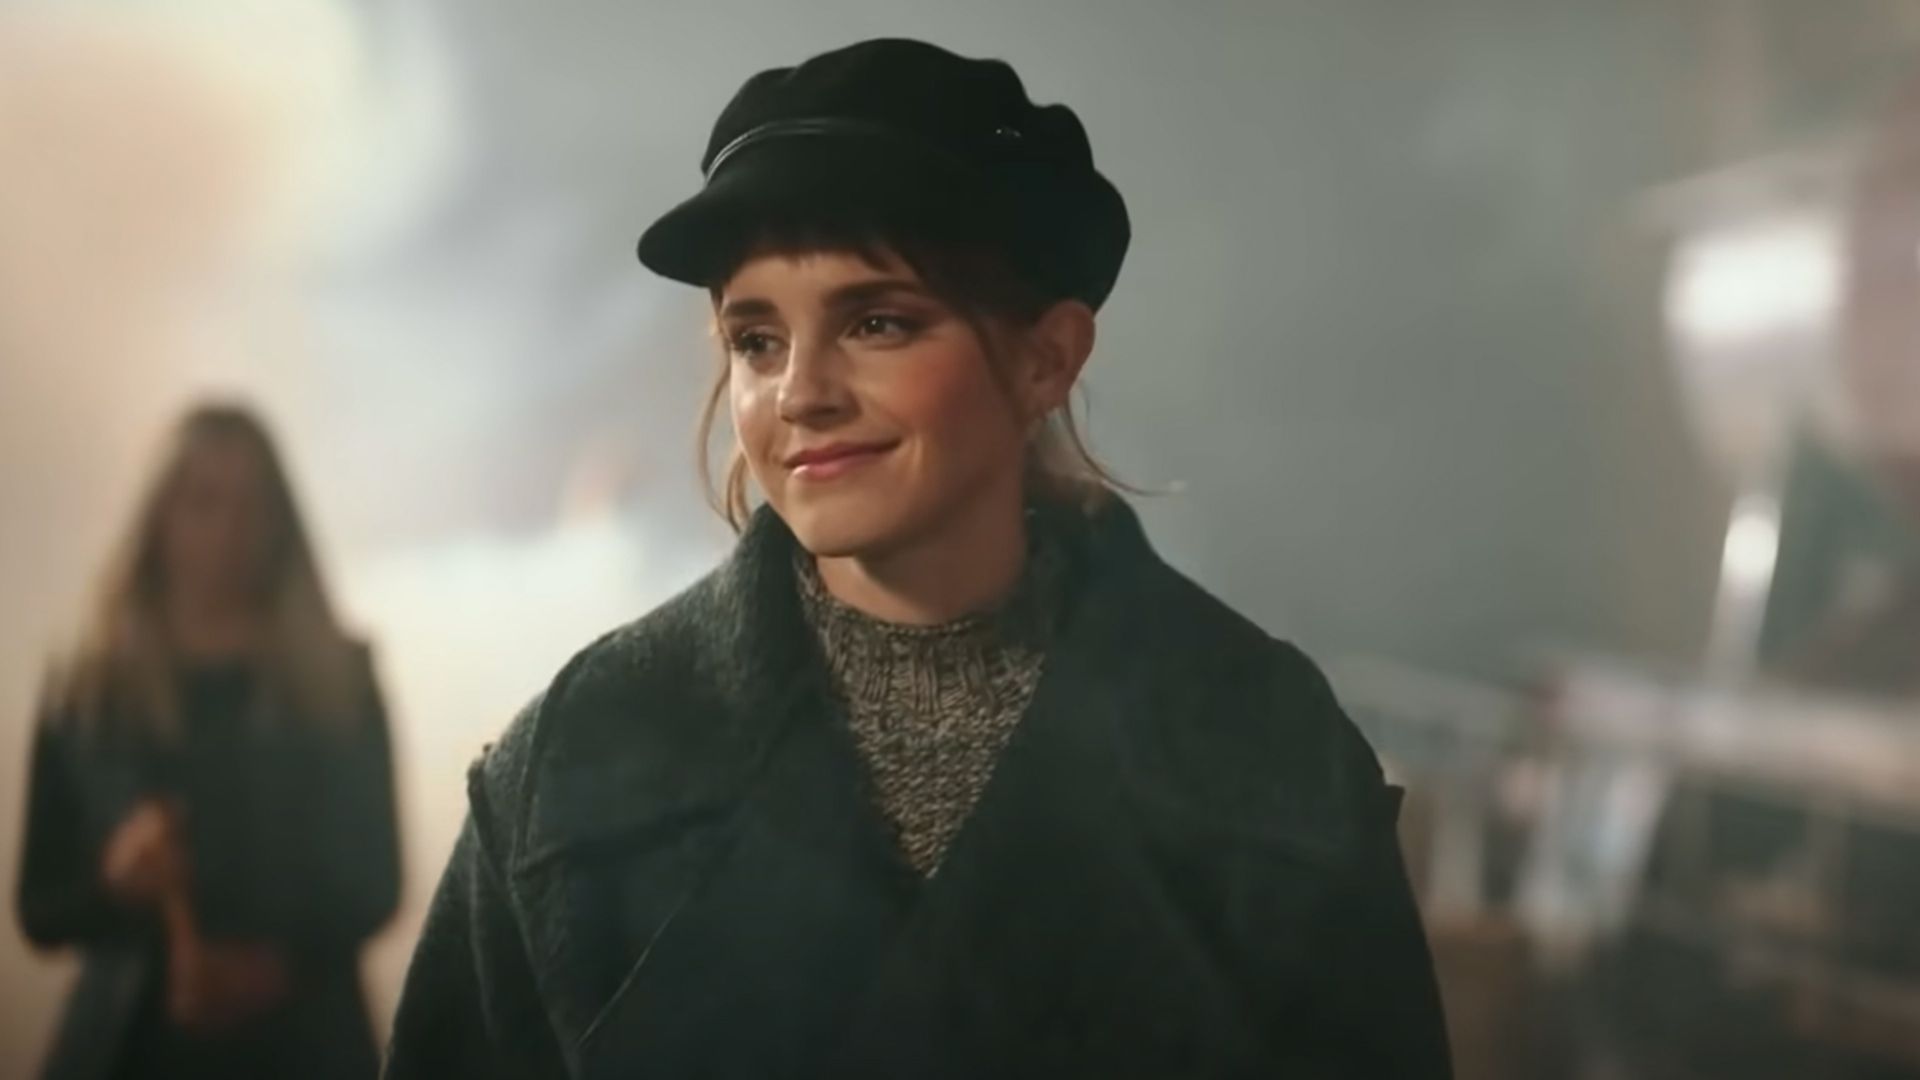 Harry Potter fans have same reaction to Emma Watson and Tom Felton's reunion in official trailer